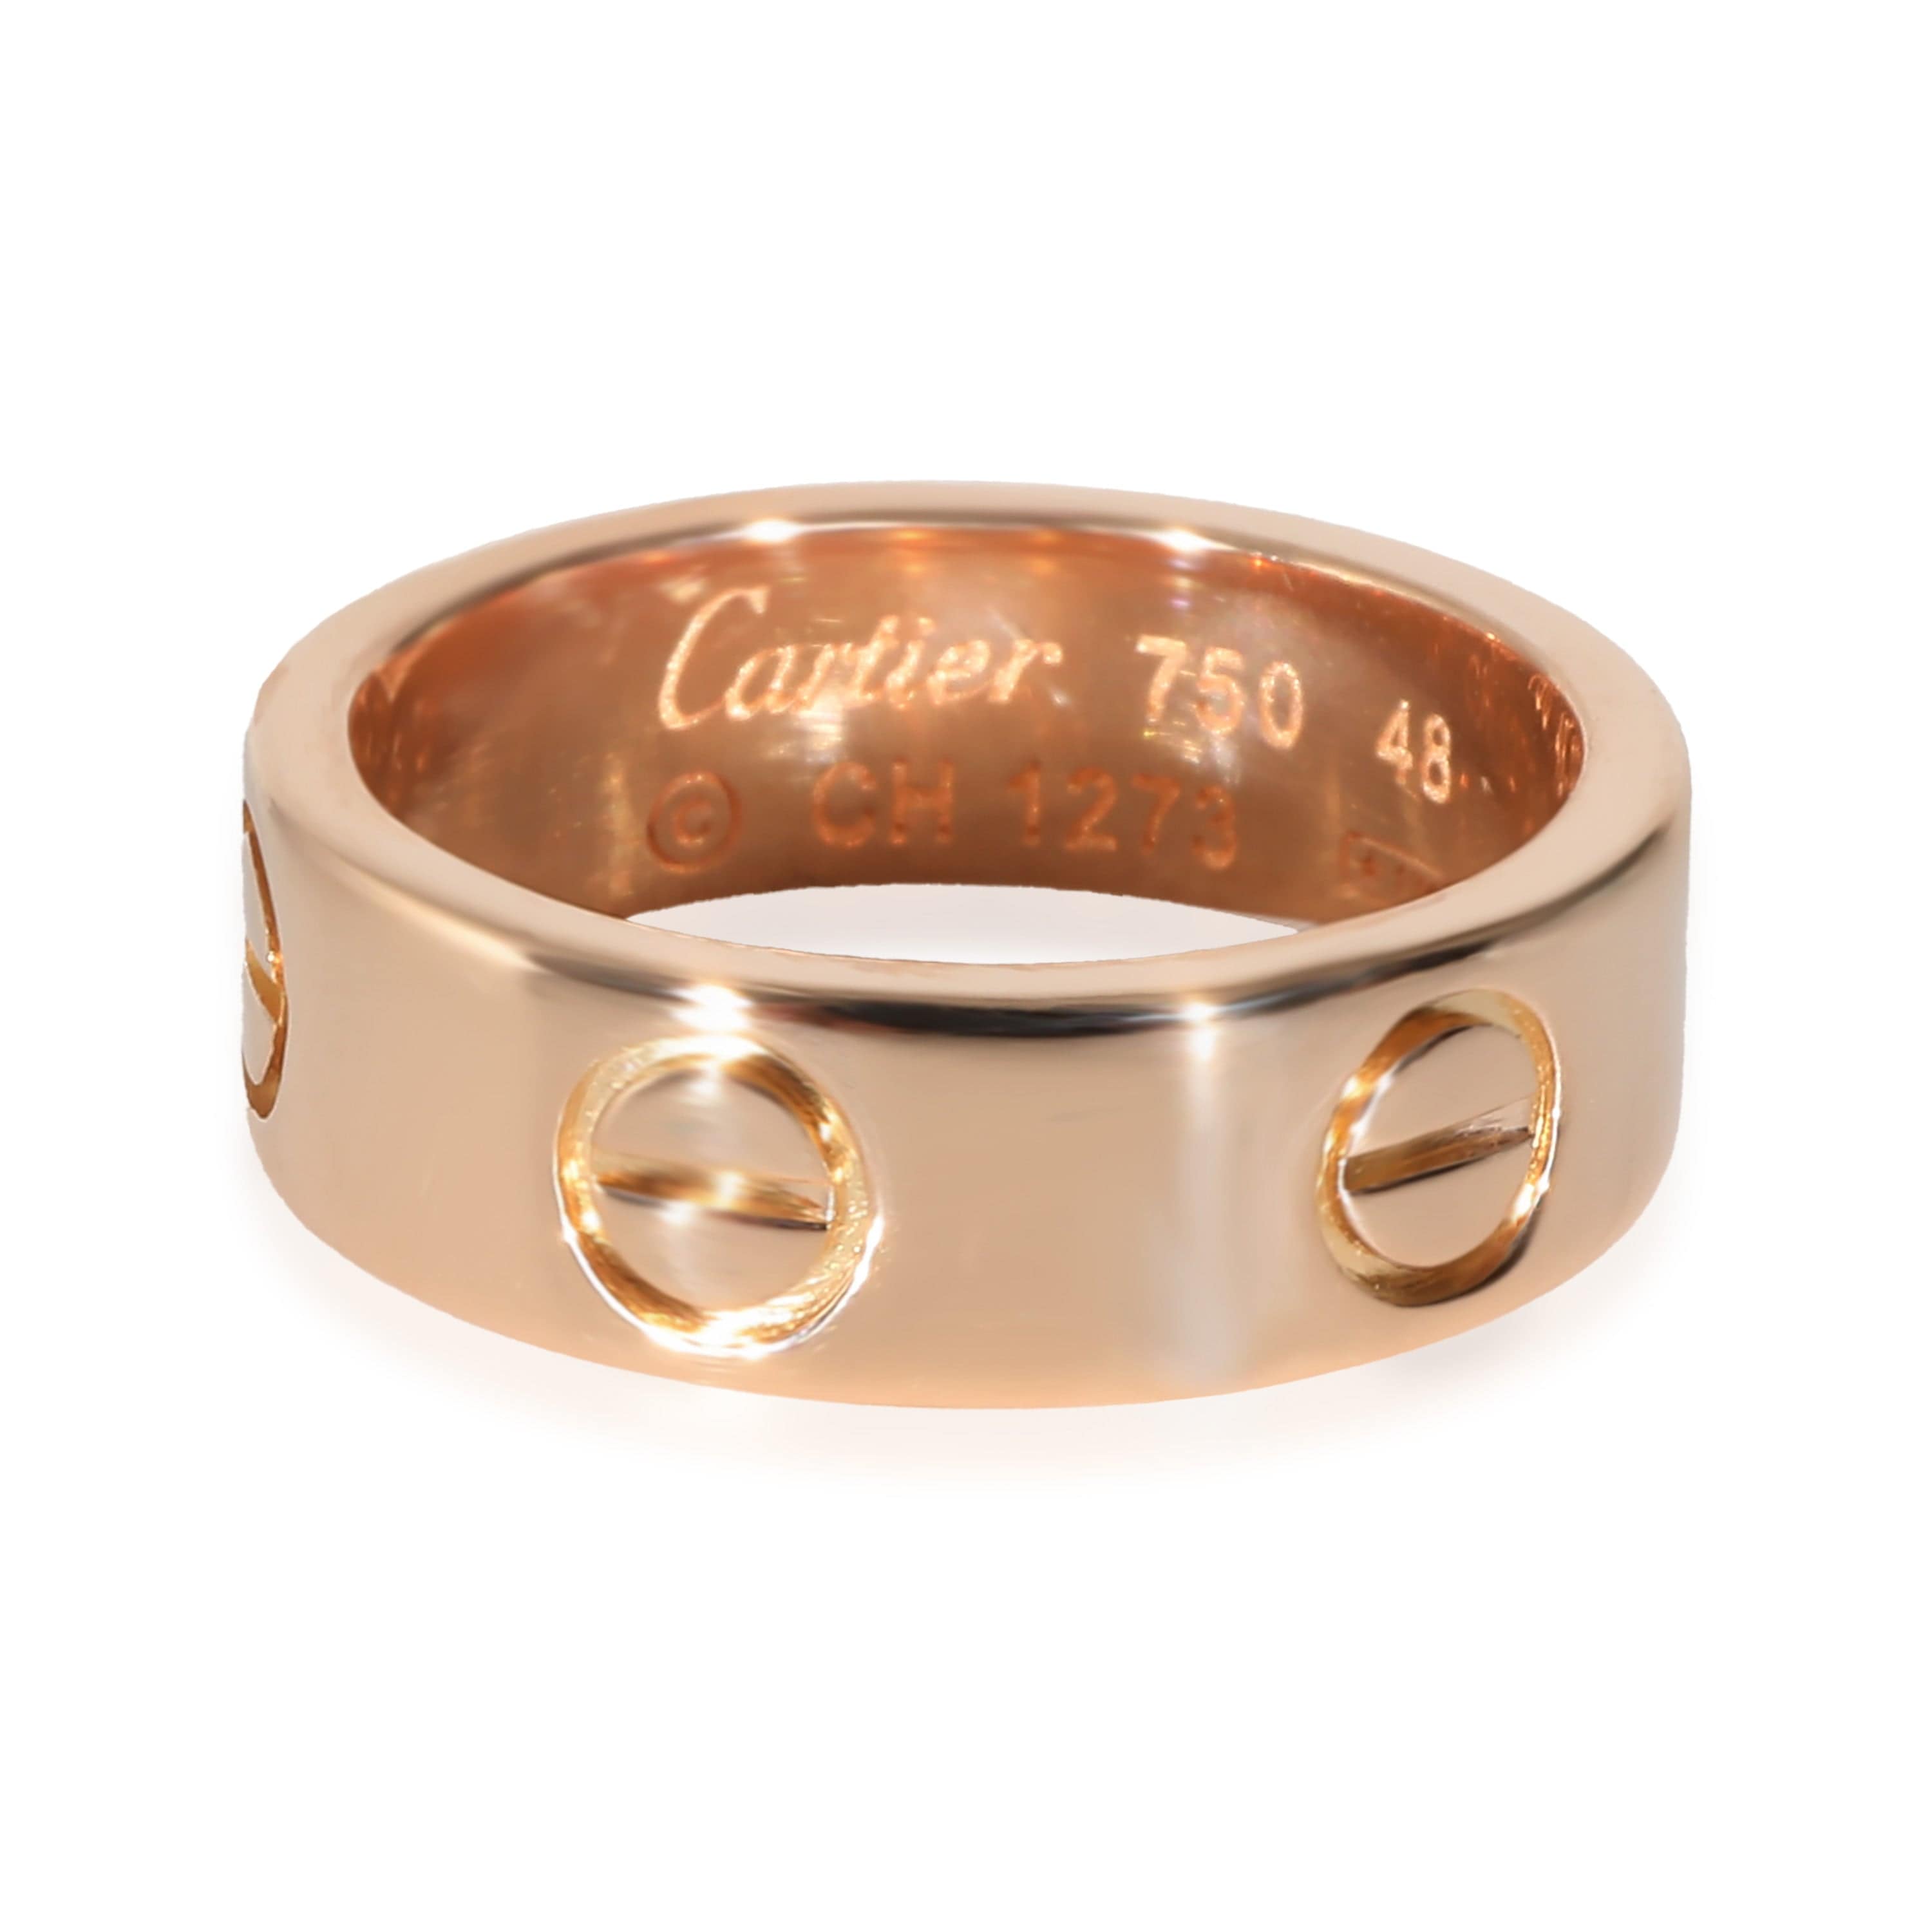 Cartier Cartier Love Fashion Ring in 18k Rose Gold